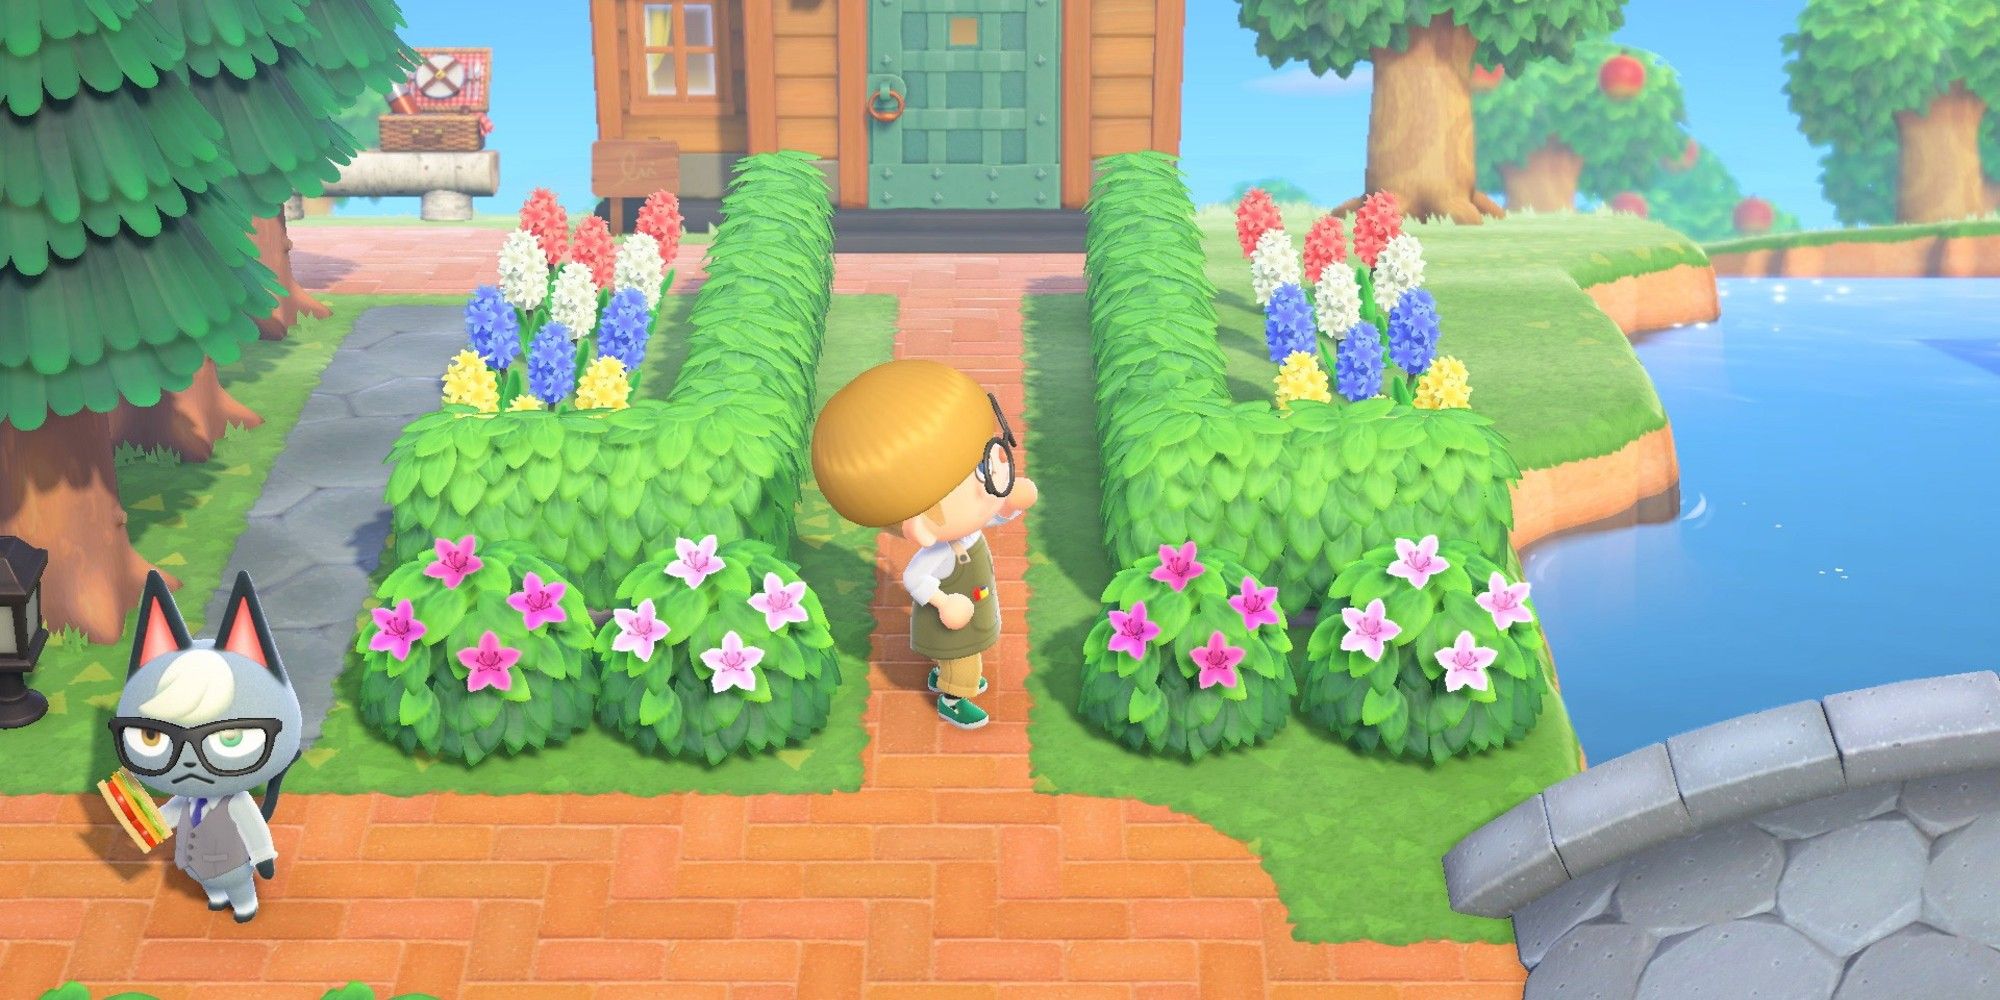 Shrubs and plants will be available for Nature Day in Animal Crossing: New Horizons